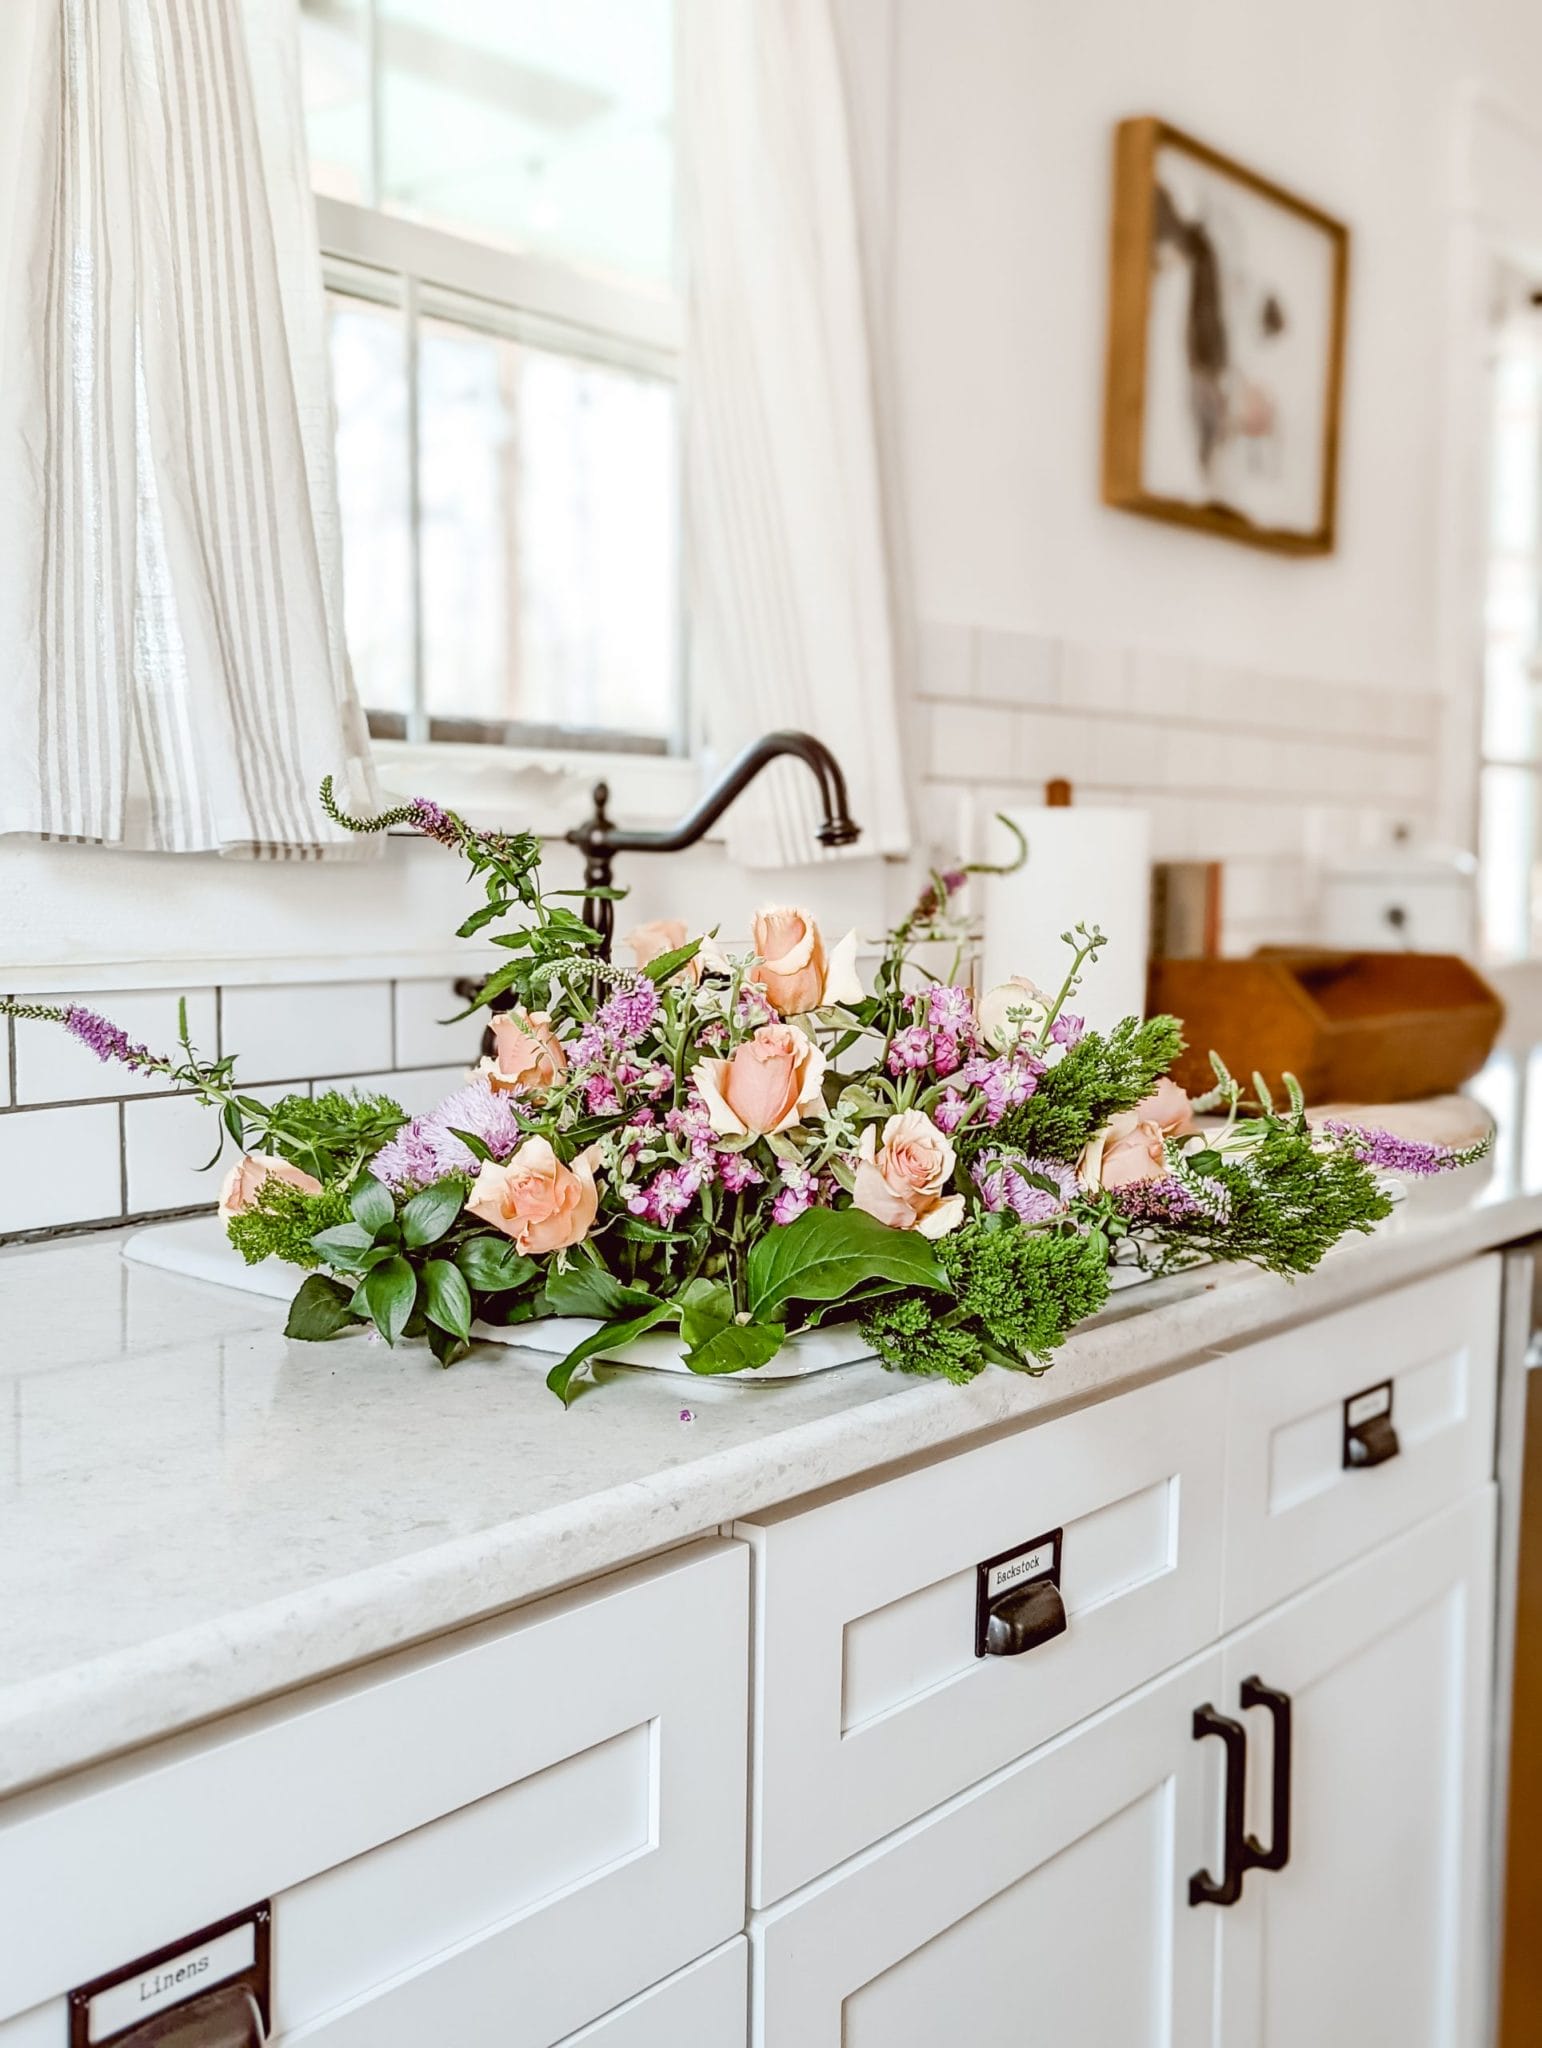 15 Simple Tips and Ways to Bring Spring Into Your Home